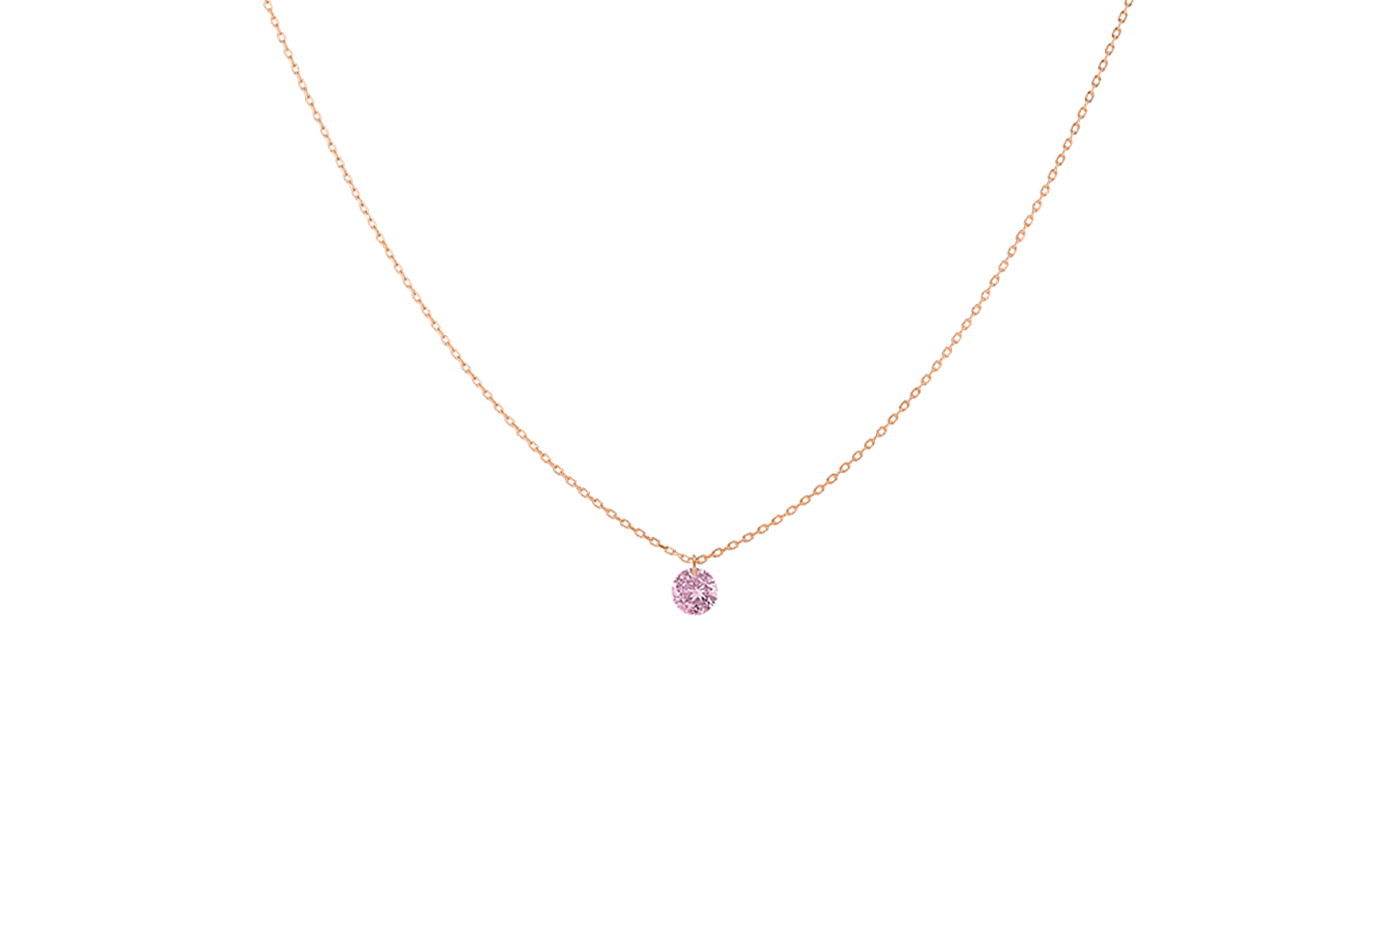 Collier CONFETTI, saphir rose, Rond 5mm, 0,50 ct approx., or rose 18KT, 1,4gr.